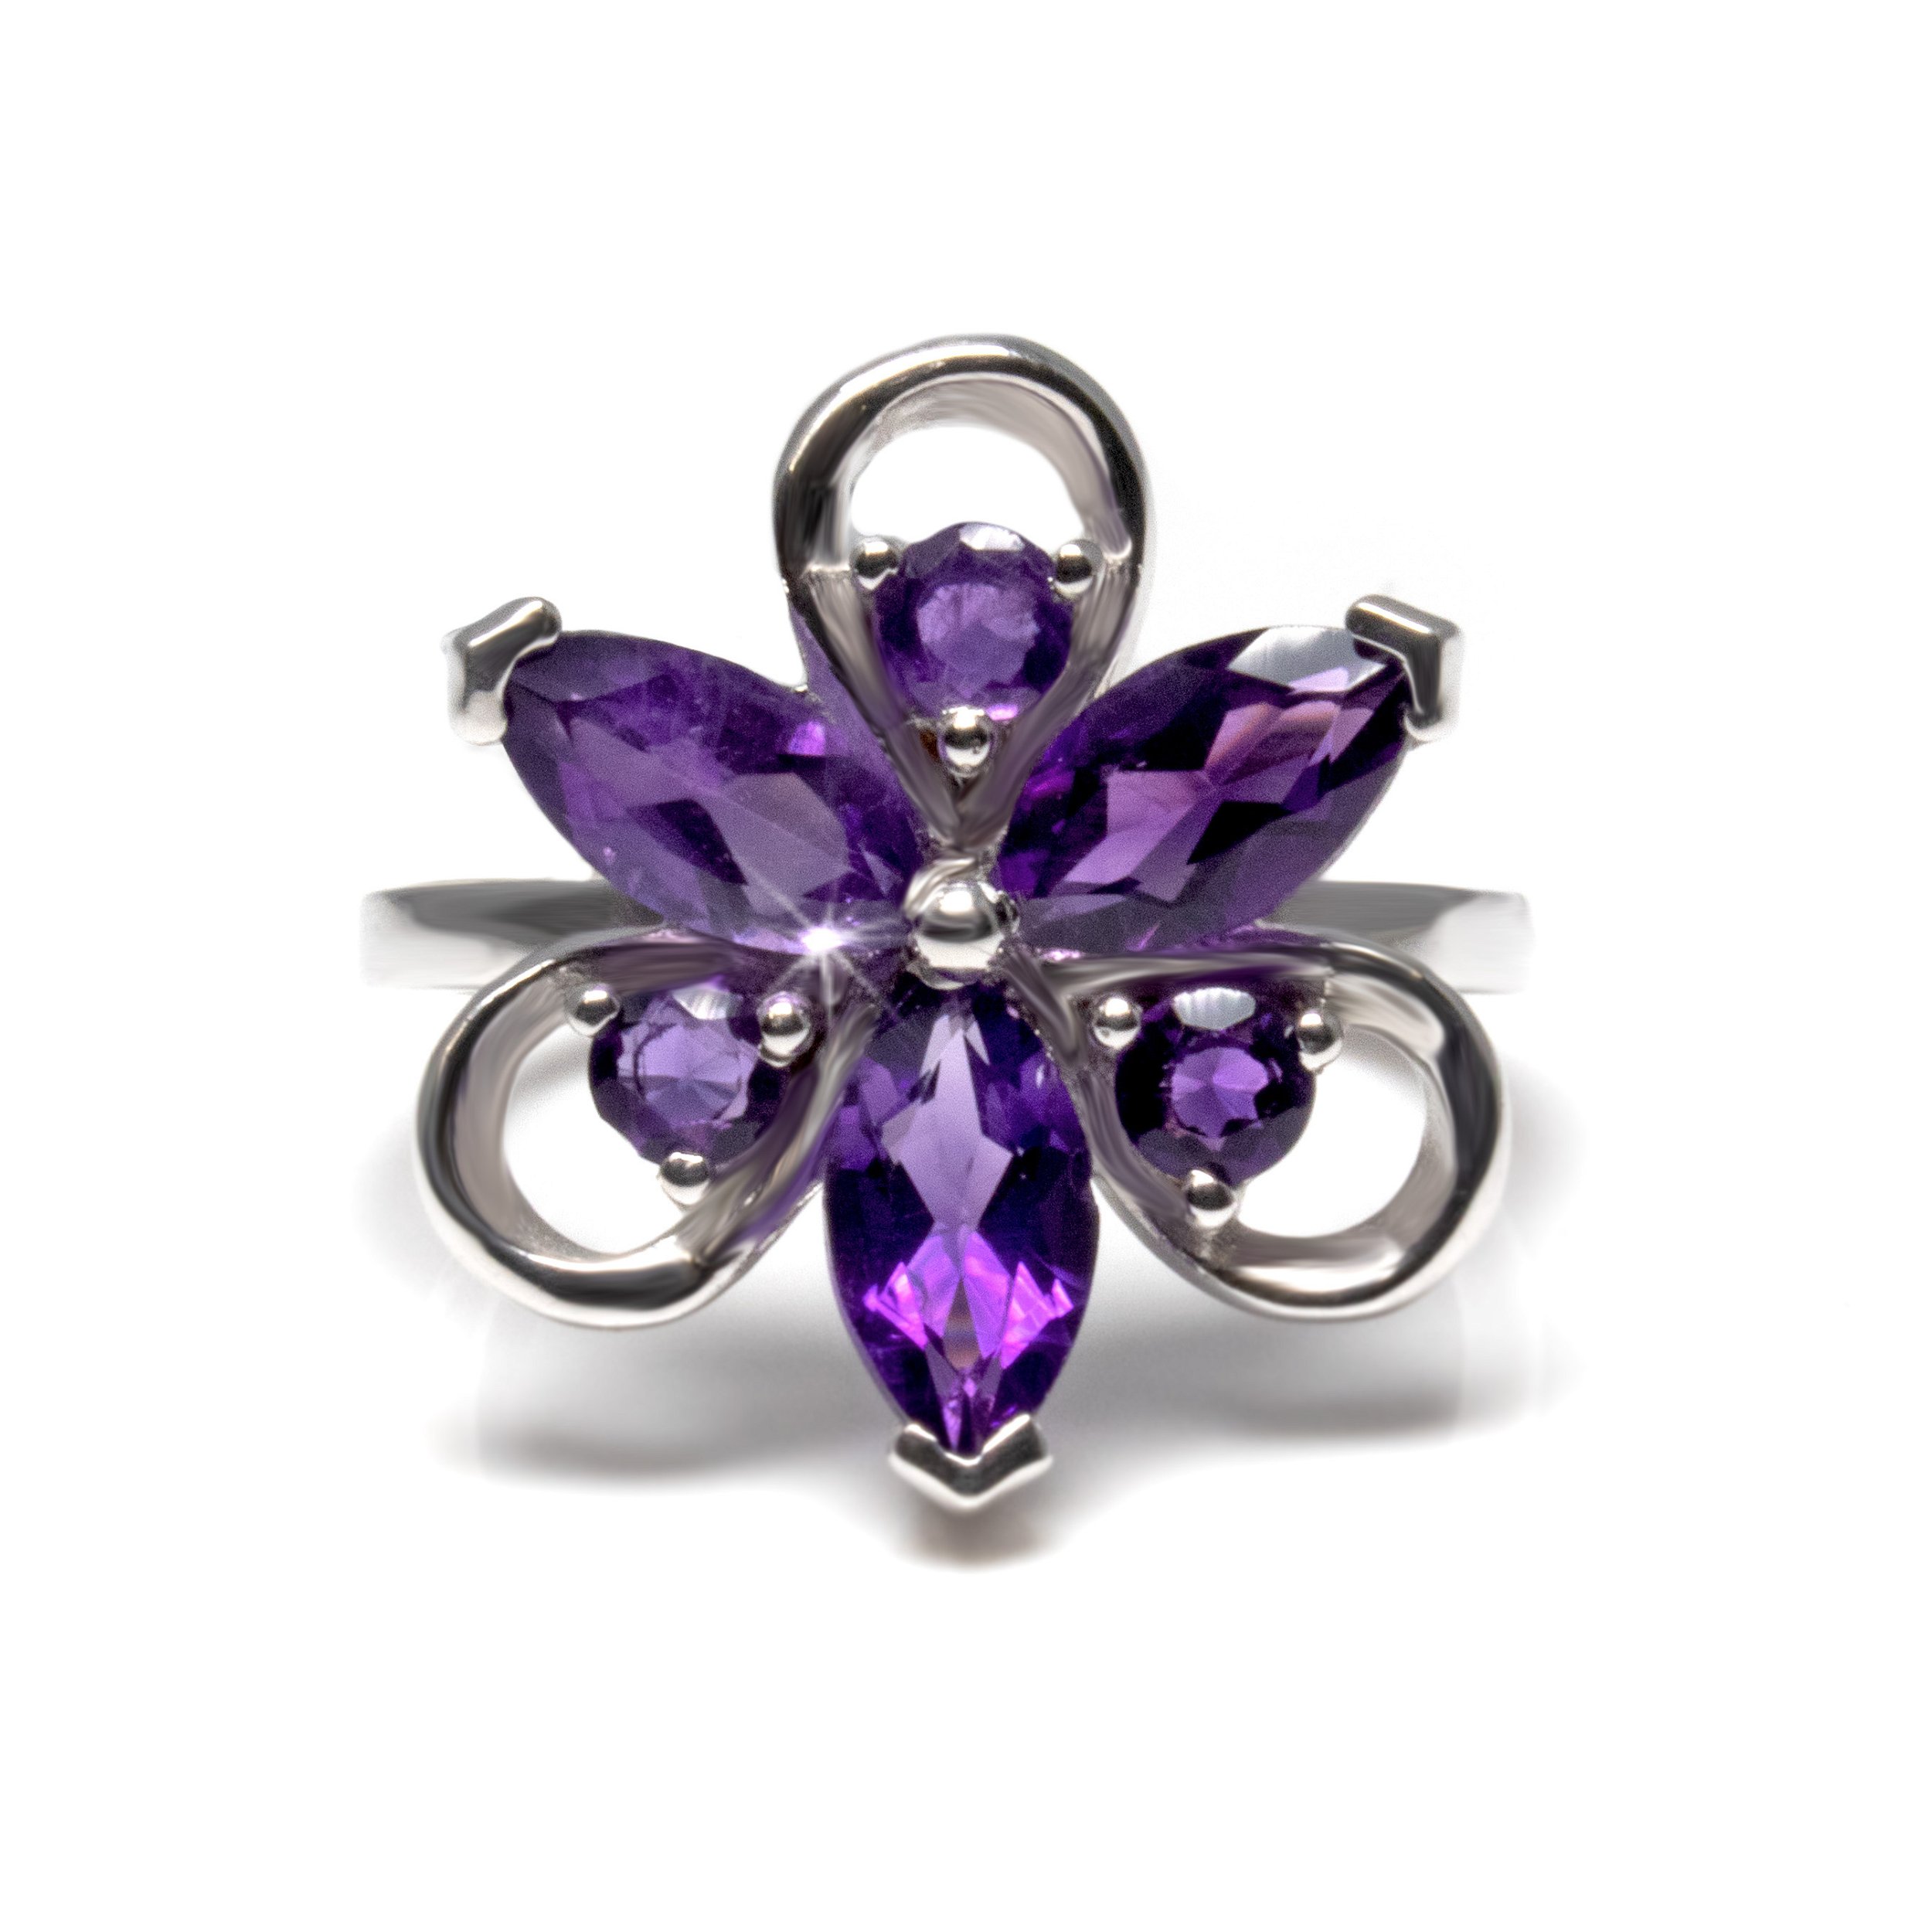 Faceted Amethyst Ring Size 6 - with 3 Faceted Sharp Ovals & 3 Faceted Rounds With Silver Loop Detail - Water Lily Shape - Prong Set